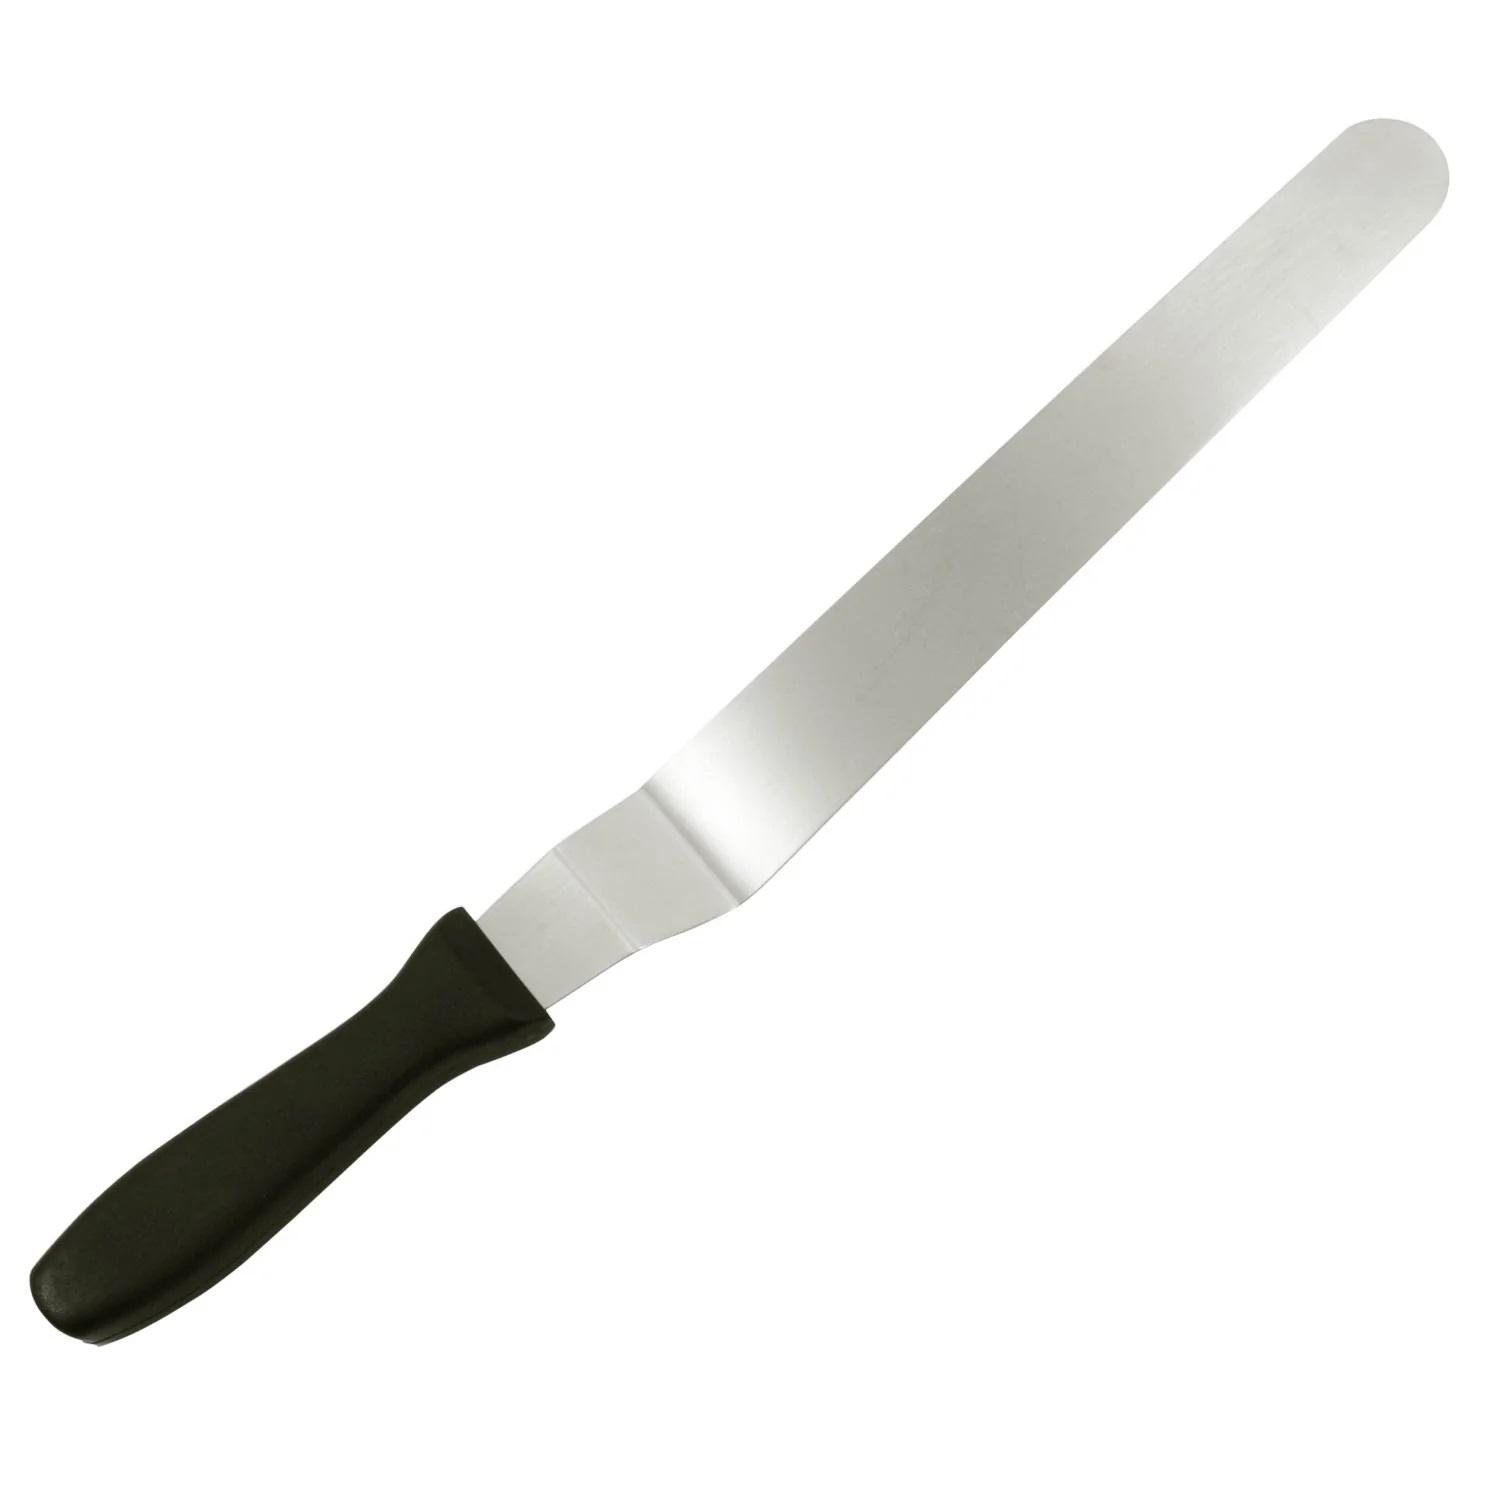 what-is-a-straight-edge-spatula-used-for